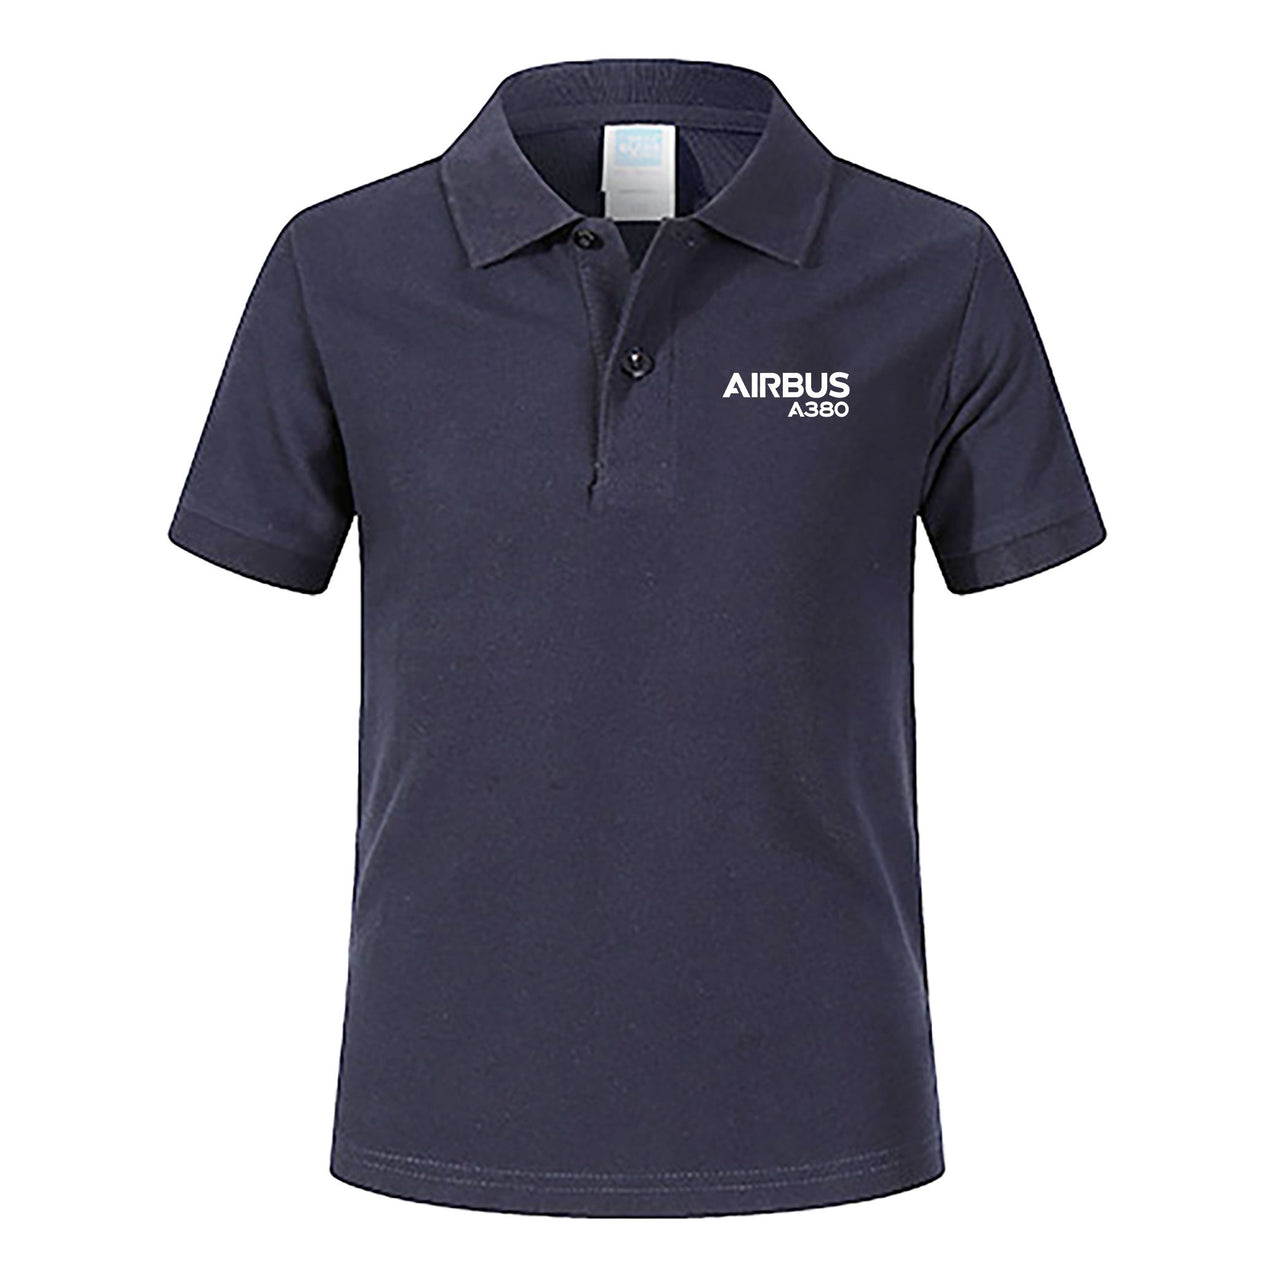 Airbus A380 & Text Designed Children Polo T-Shirts